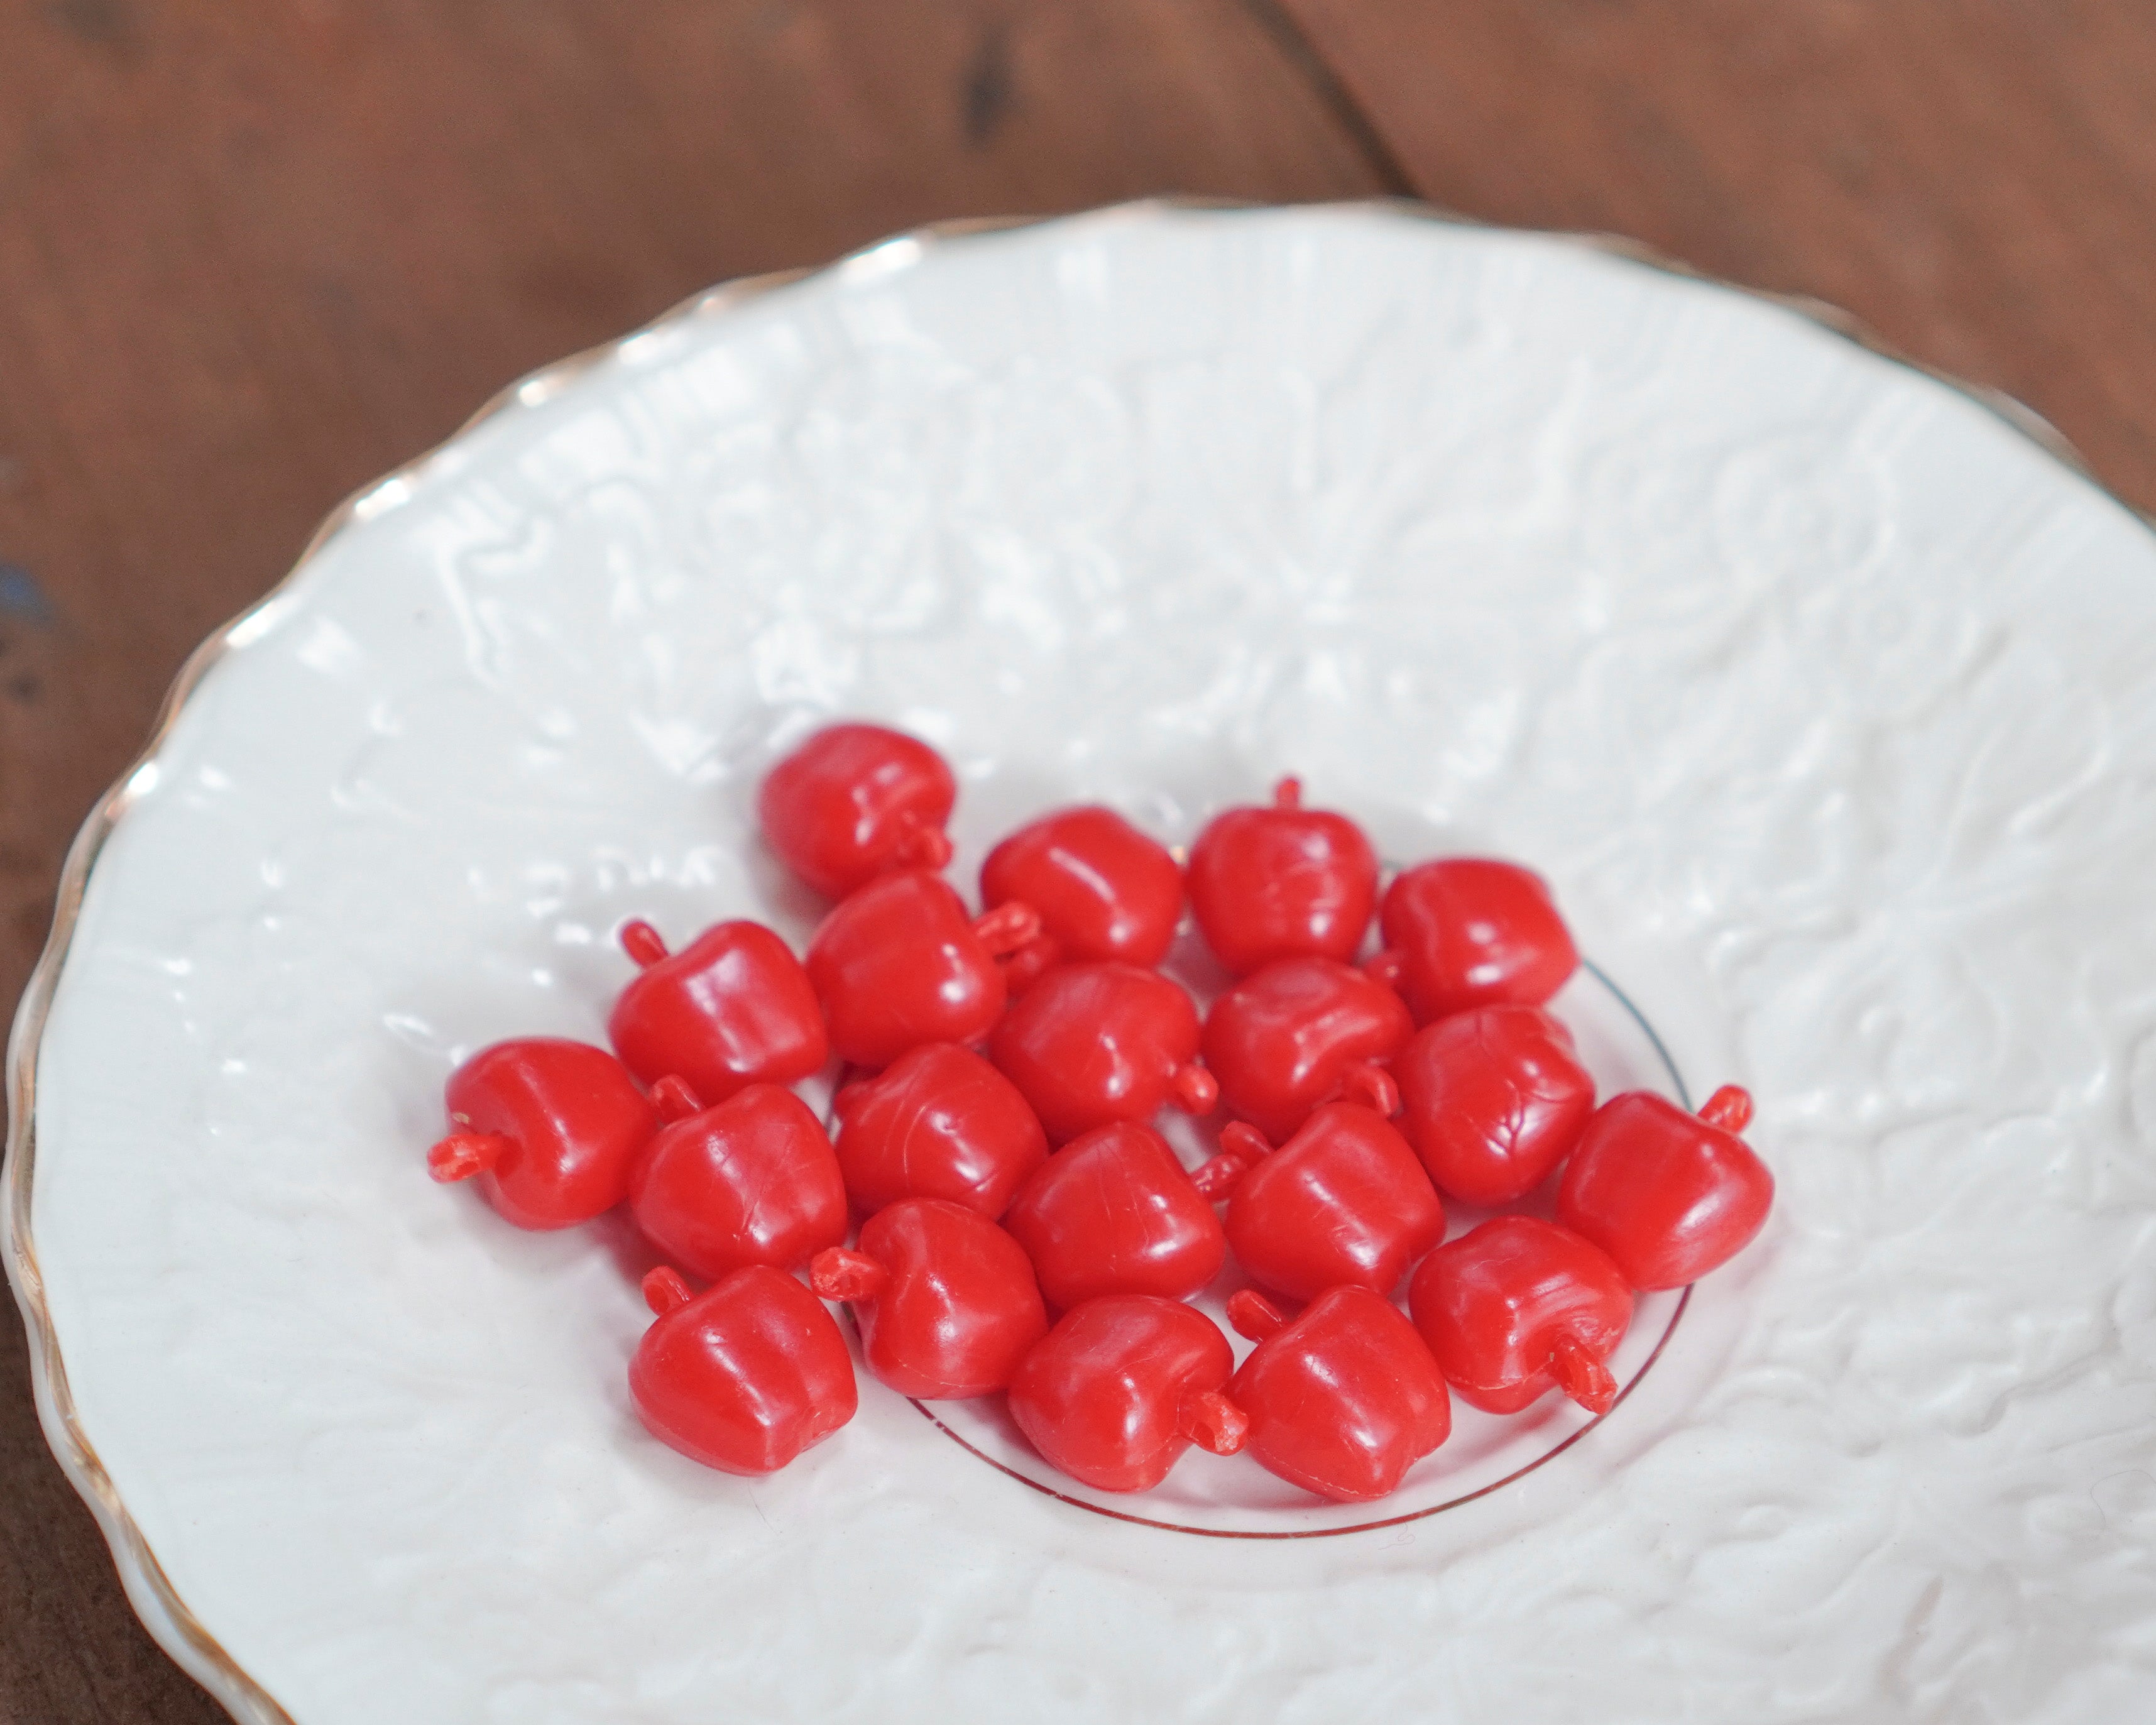 Red Apple Charms - Miniature Red Plastic Apples, 20 Pcs.